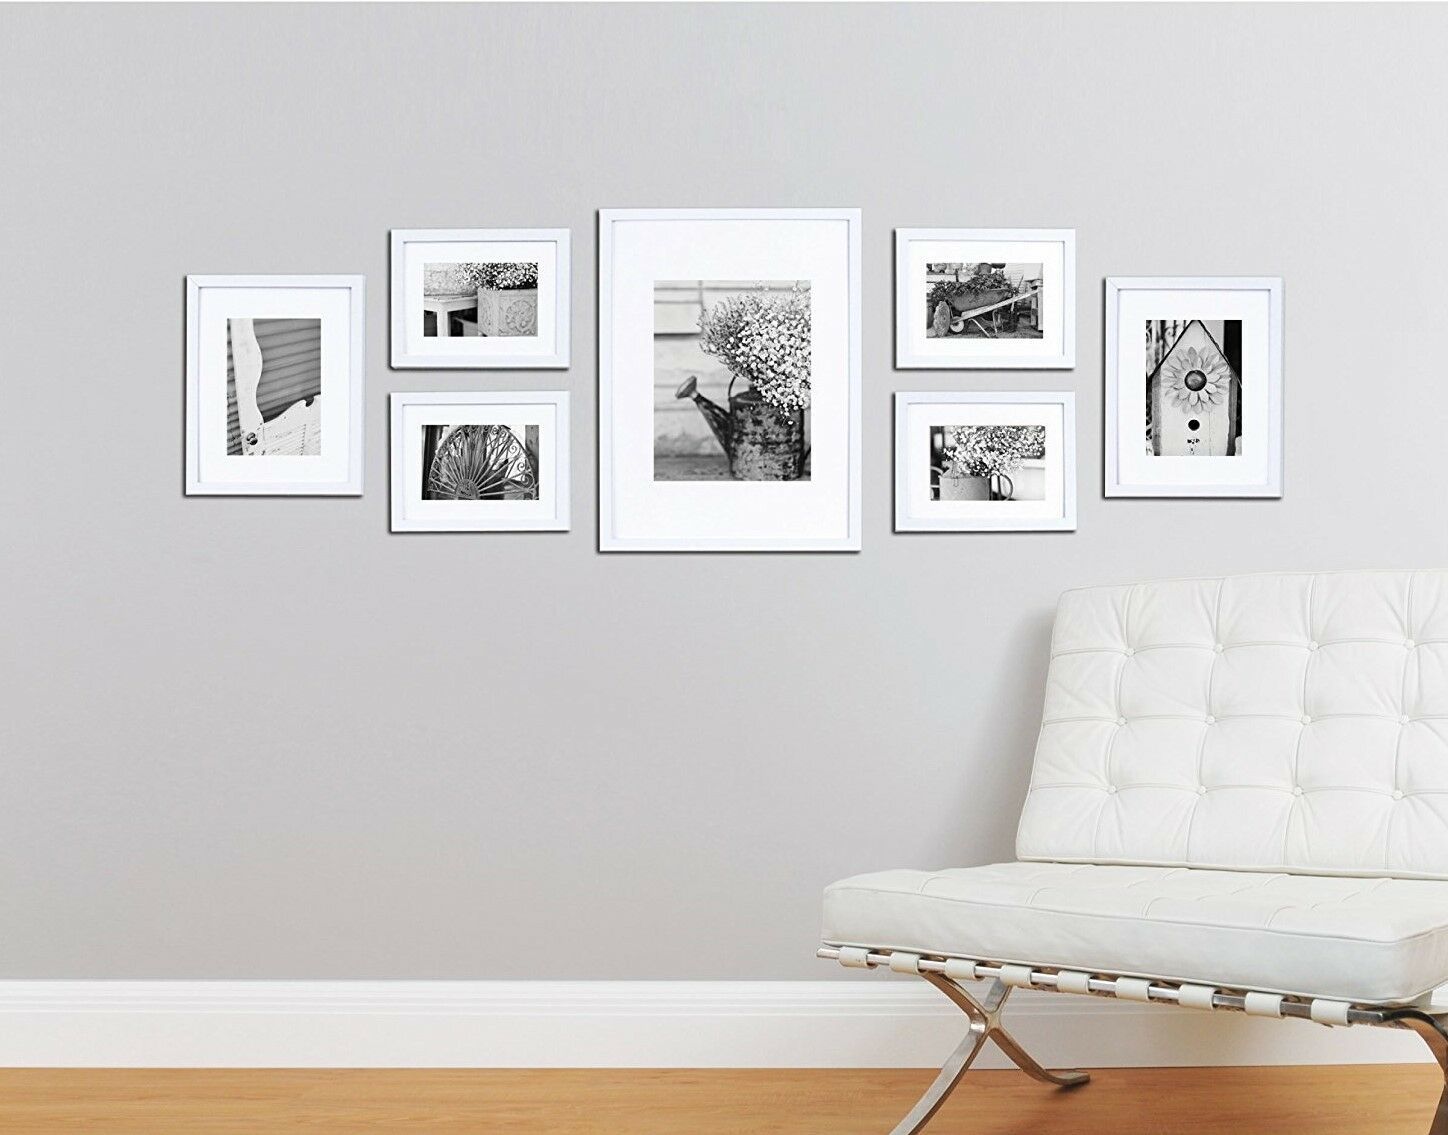 Primary image for Wall Frame Set White 7 New Picture Photo Gallery Solid Wood Frames Home Decor